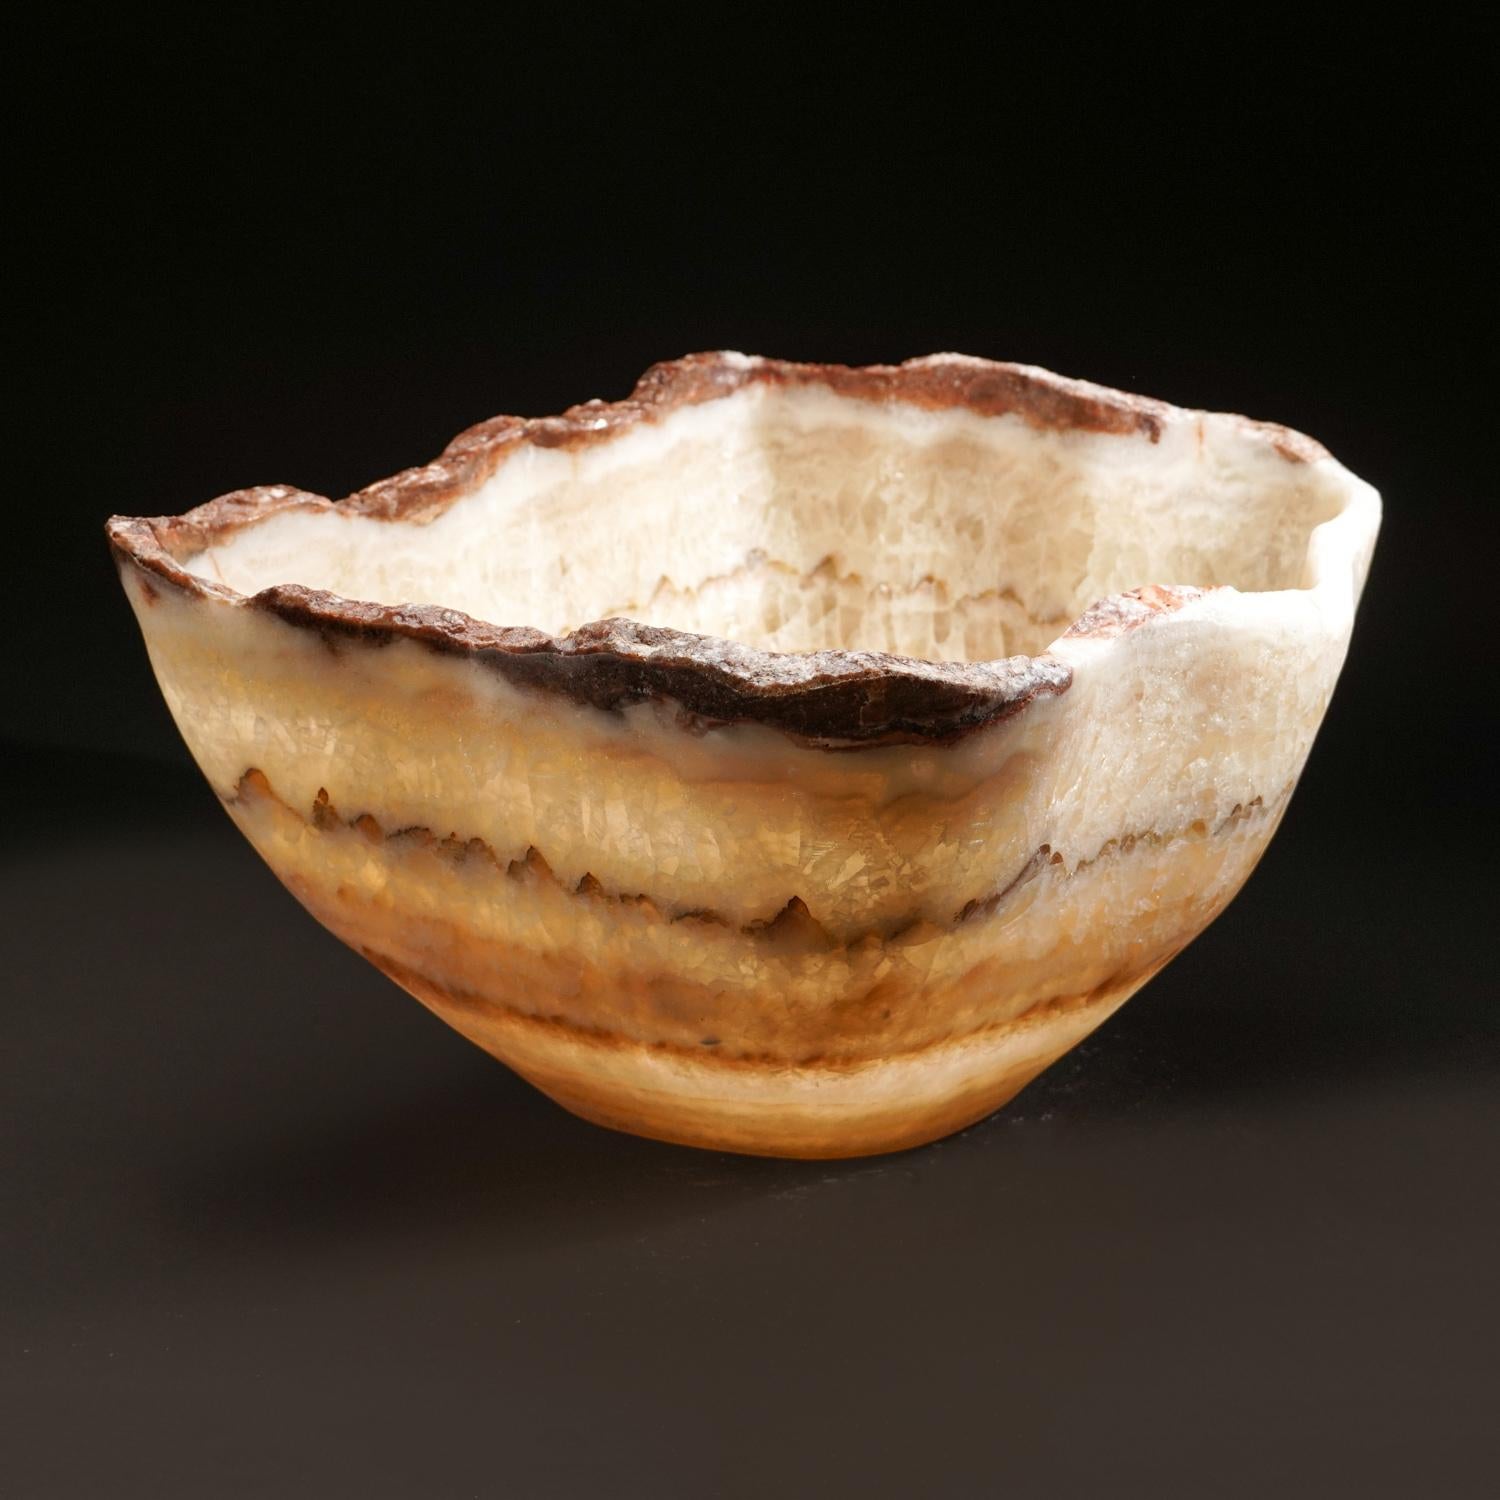 Contemporary Large Polished Onyx Decorative Bowl from Mexico ( 19.25